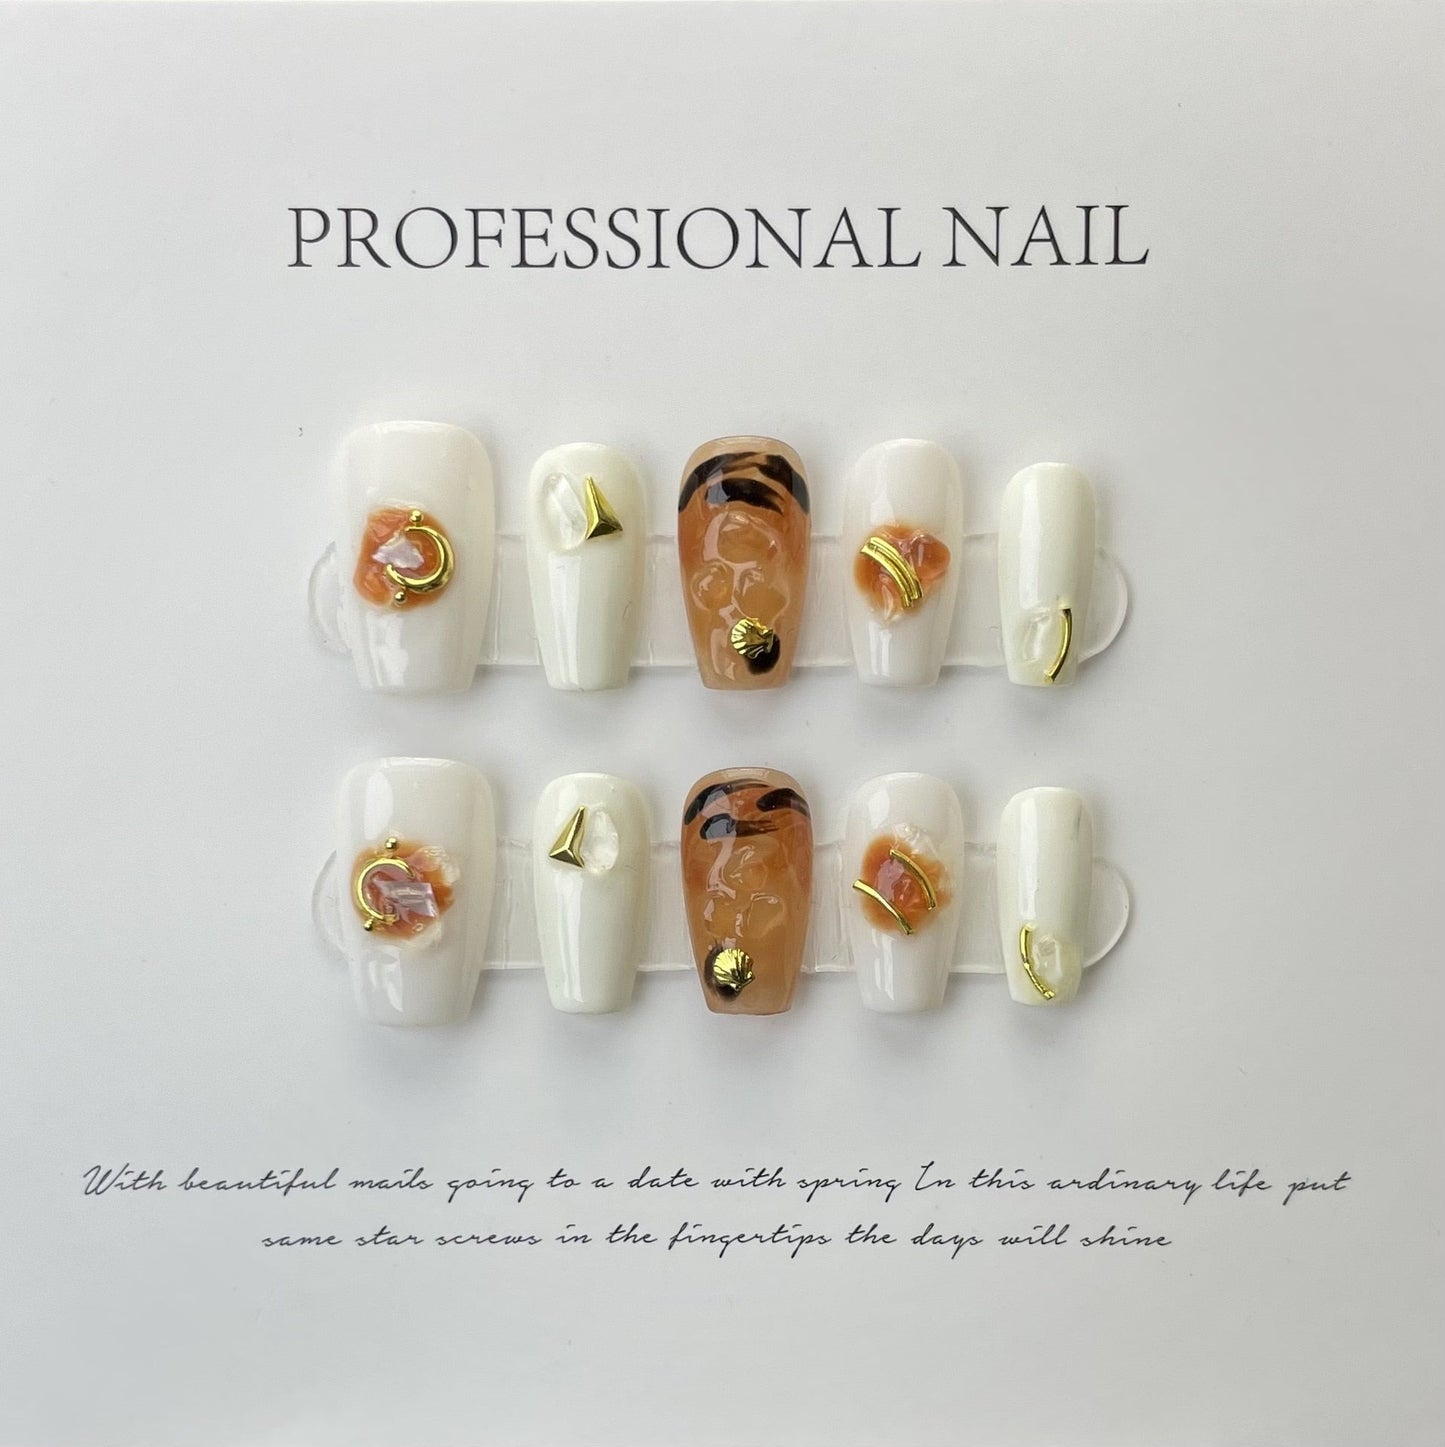 301-315 Number Flower Designed Handmade Fake Nails With Glue Professional Wearable French Advanced Ballet Press On Nails